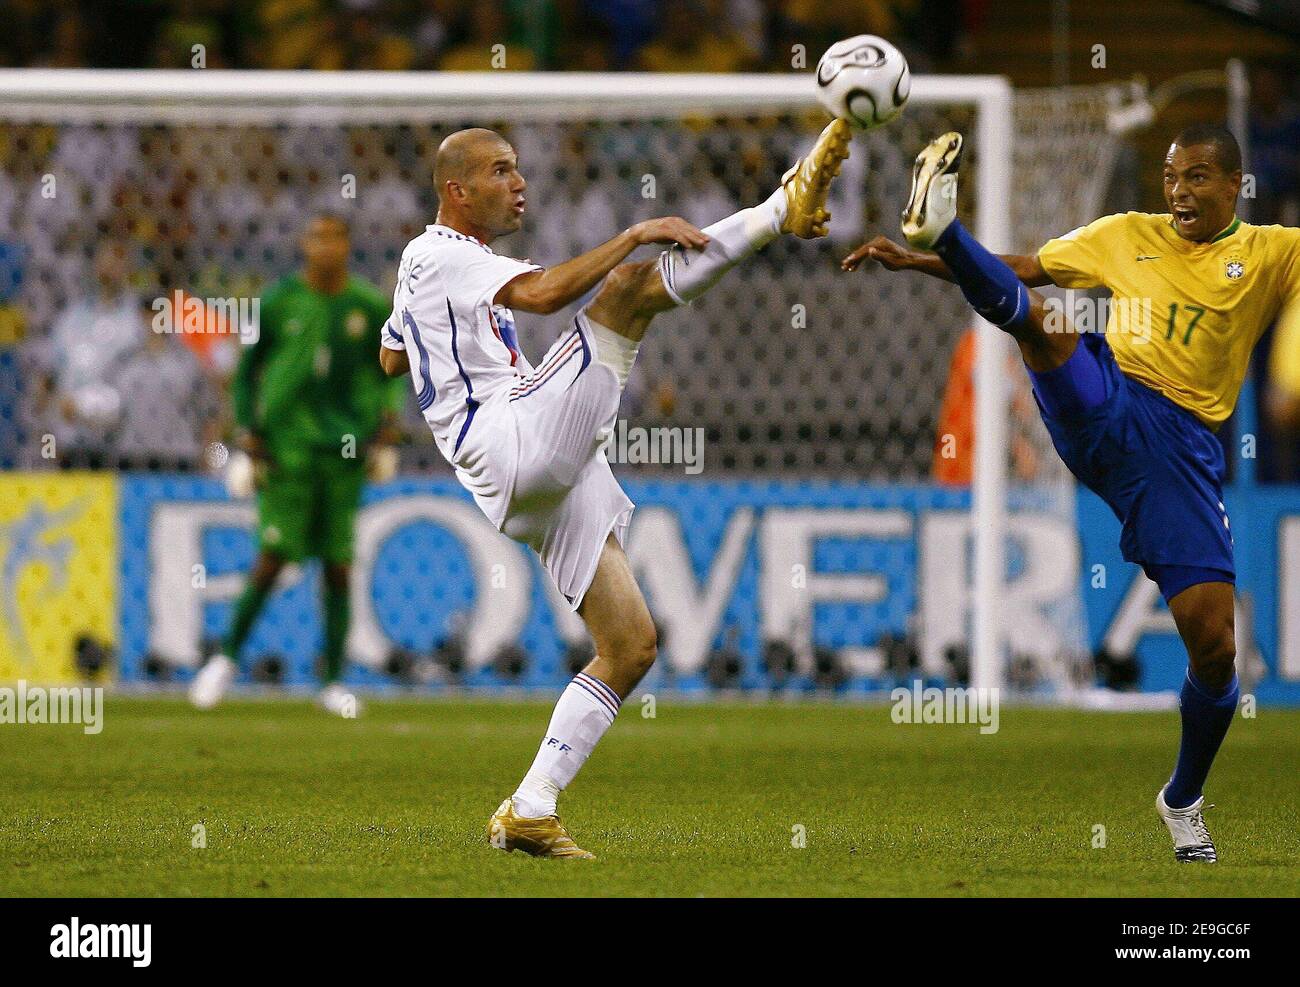 France's Zinedine Zidane and Brazil's Silva Gilberto battle for the ball during the World Cup 2006, quater-final, Brazil vs France at the Commerzbank-Arena stadium in Frankfurt, Germany on July 1, 2006. France won 1-0 and advances to World Cup semifinals. Photo by Christian Liewig/ABACAPRESS.COM Stock Photo